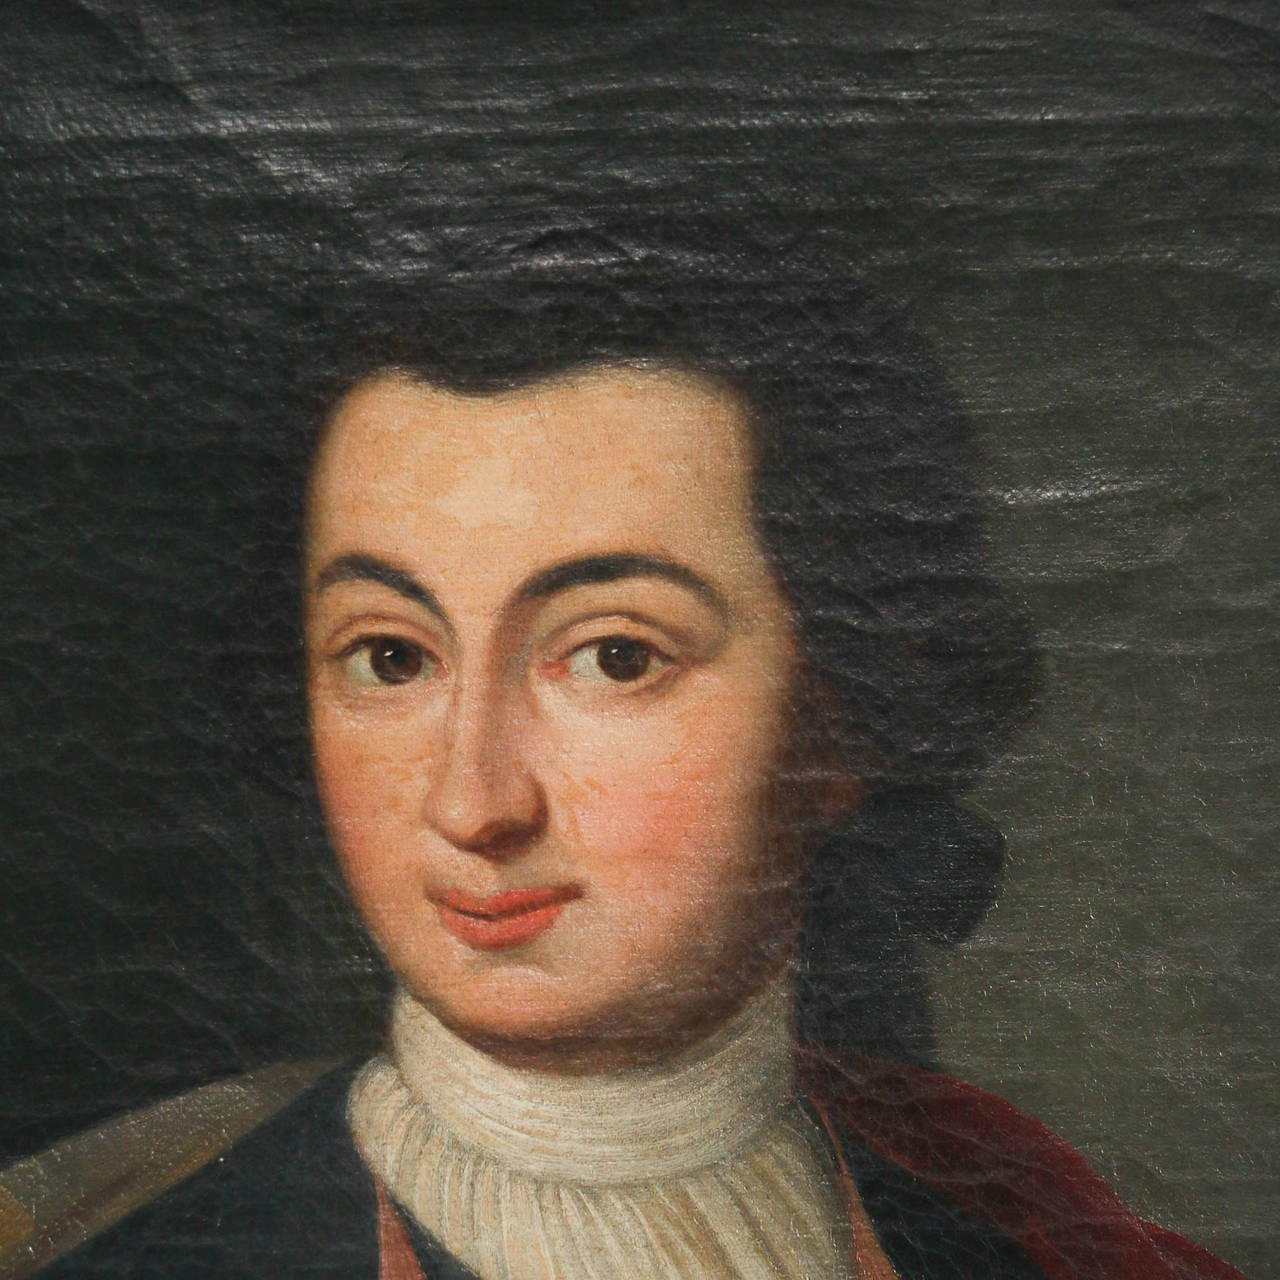 Oil on canvas painting,  unknown artist of the 19th century 'Herrenporträt' . Shown in three-quarter profile. Gentleman has an aristocratic or military bearing. He is wearing a red cape and small portrait of a man (male family member or